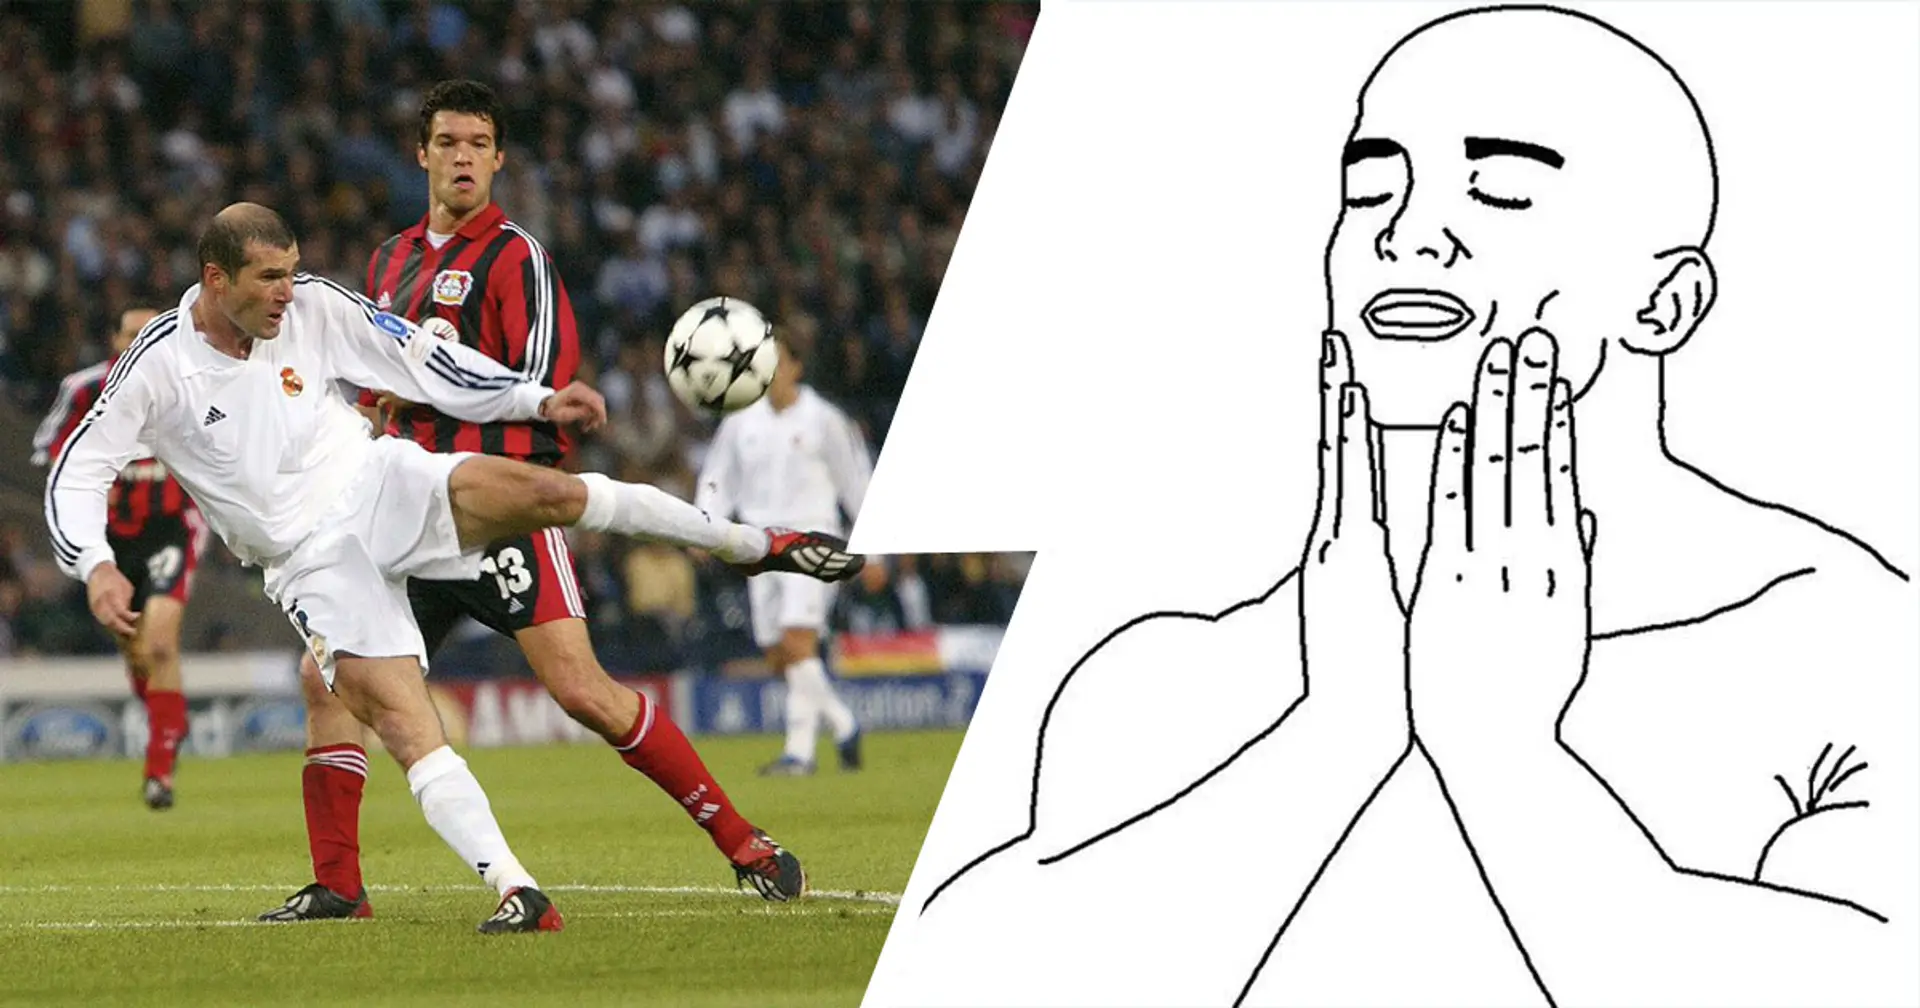 10 amazing things in the world that are as good as Zidane's CL final goal scored on this day in 2002